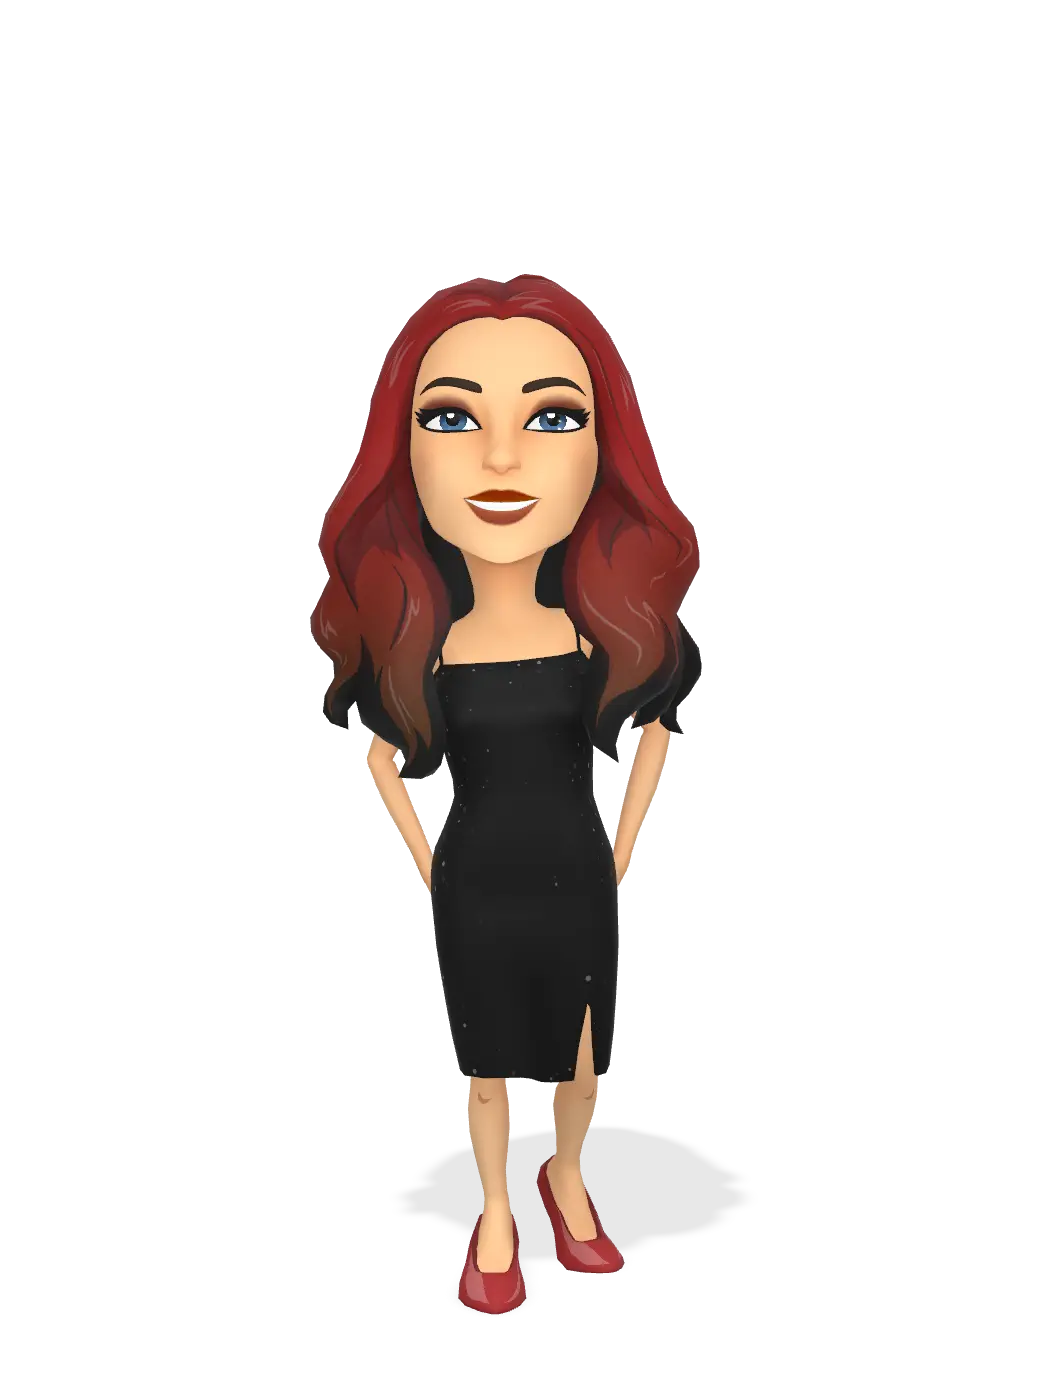 3D Bitmoji for therealskyesax